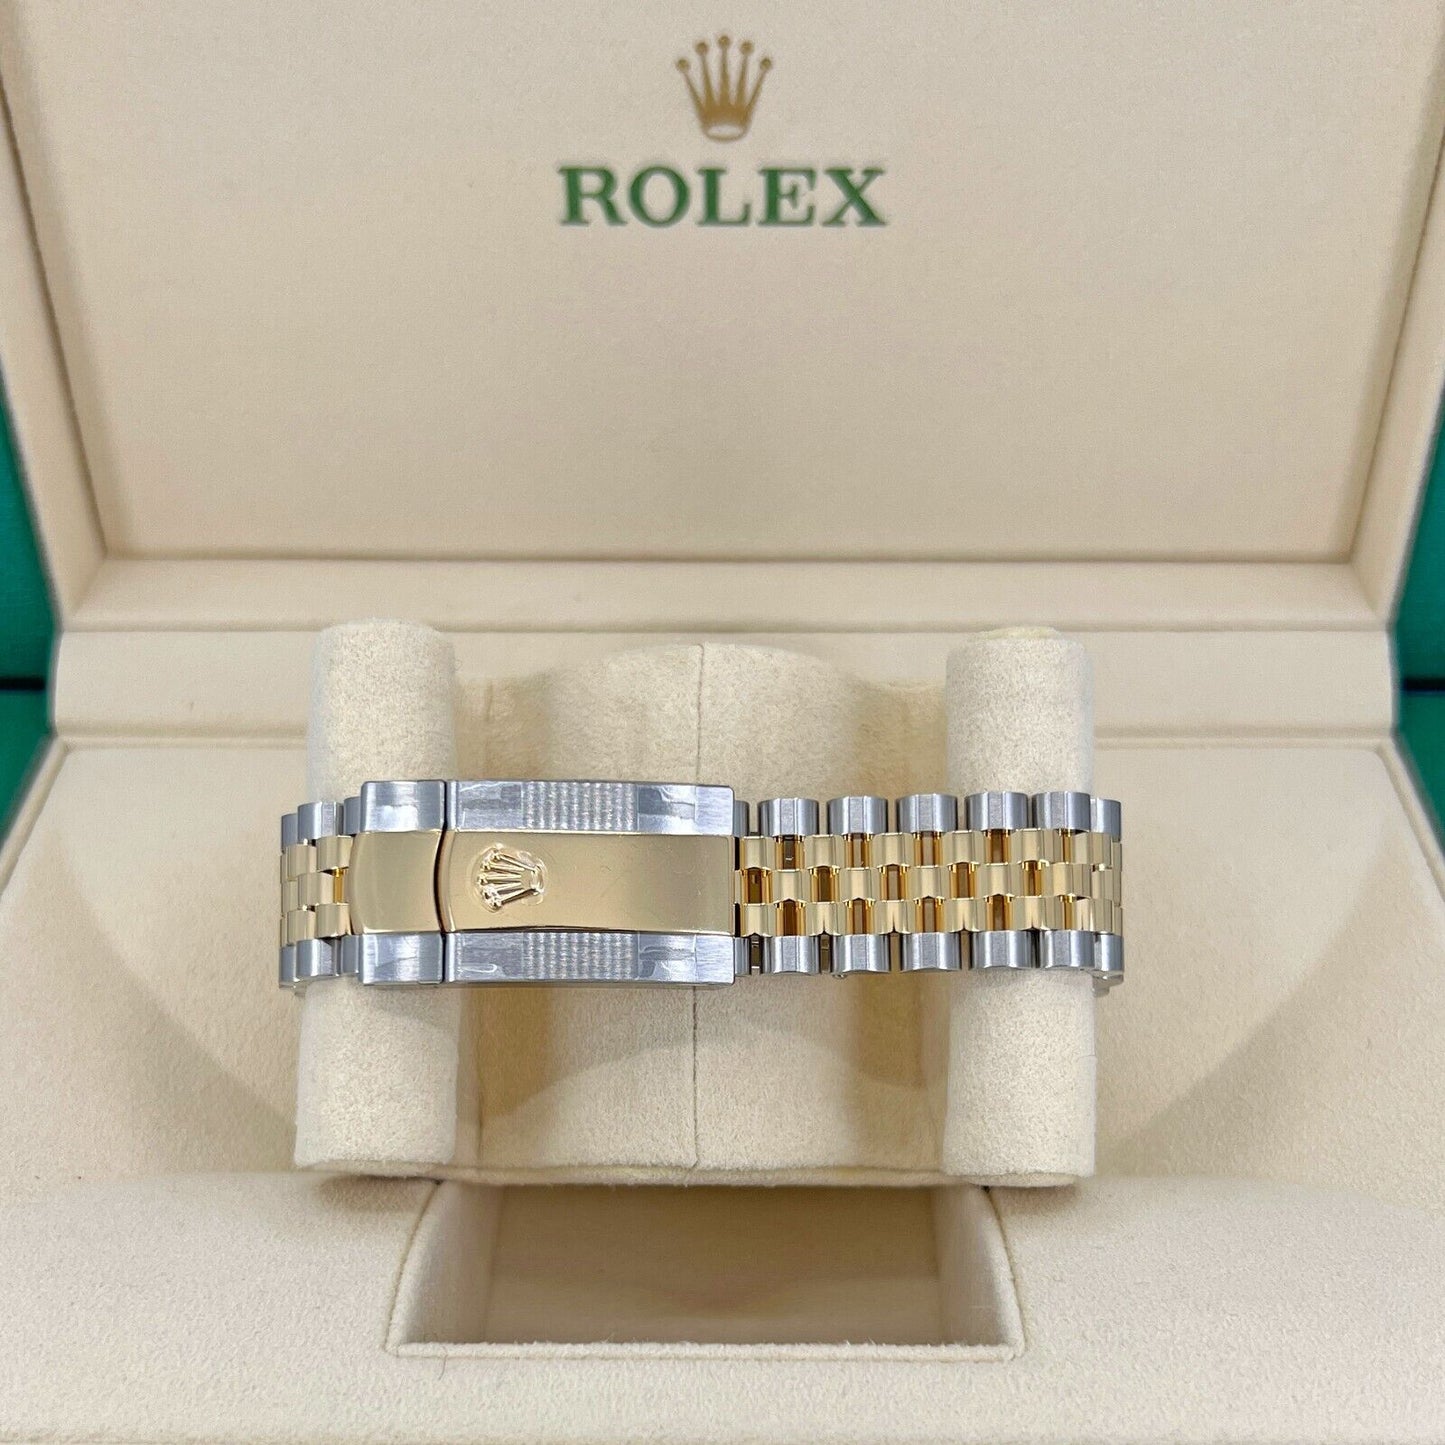 Rolex Datejust 36, 18k Yellow Gold and Stainless Steel, 36mm, Golden, palm motif dial, Ref# 126233-0037, Clasp